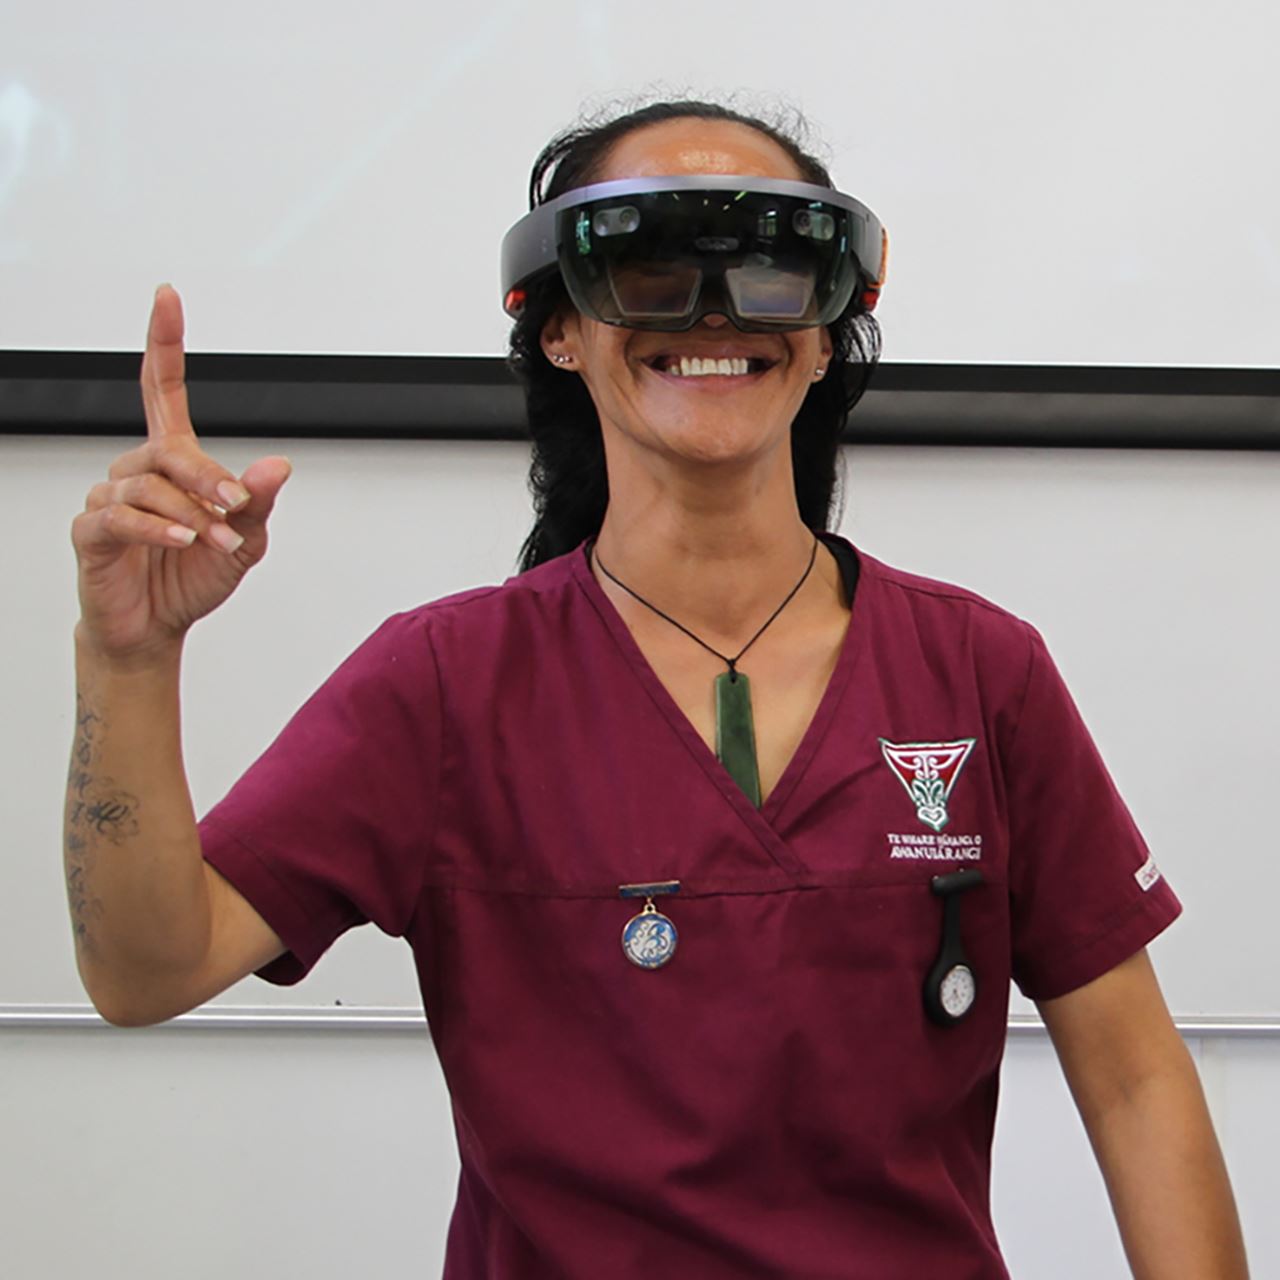 Nursing students training at indigenous tertiary institution Te Whare Wānanga o Awanuiārangi will use hologram patients to practise critical assessment and care, and virtual humans to study anatomy and physiology.